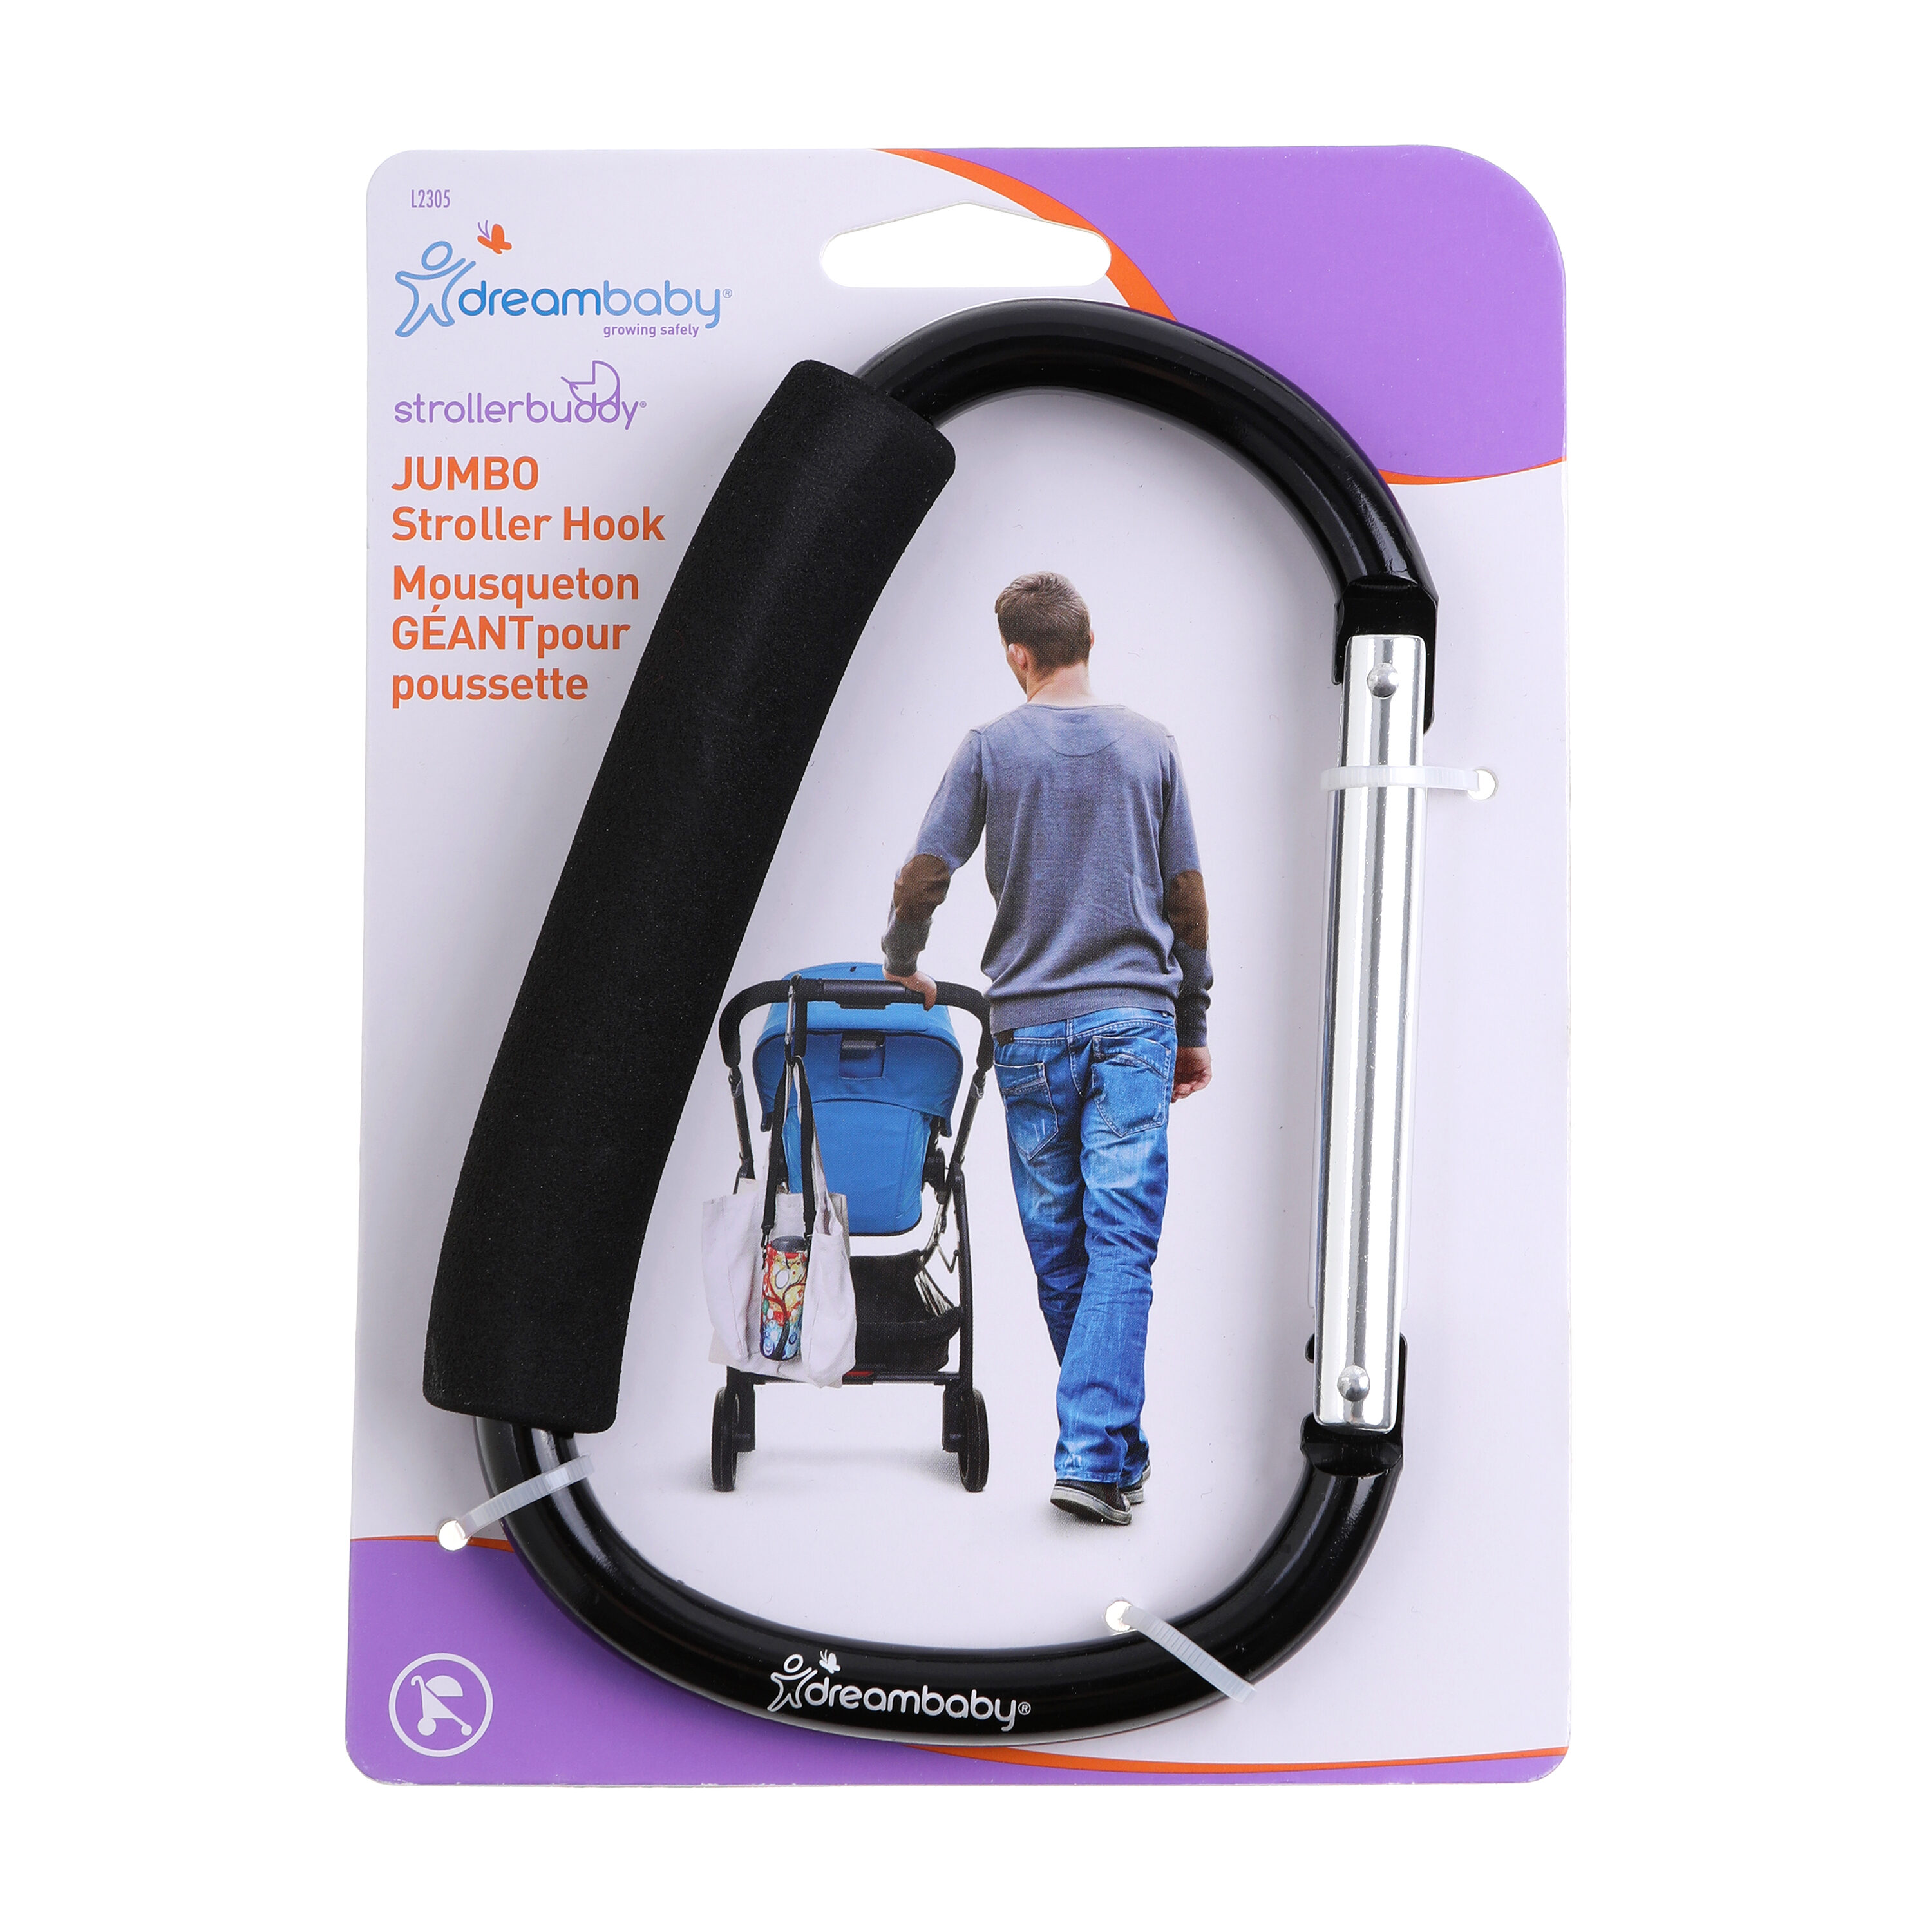 Dreambaby Strollerbuddy Jumbo Stroller Hook - Black Steel Stroller  Accessory for Convenient Storage and Easy Access to Essentials in the Child  Safety Accessories department at